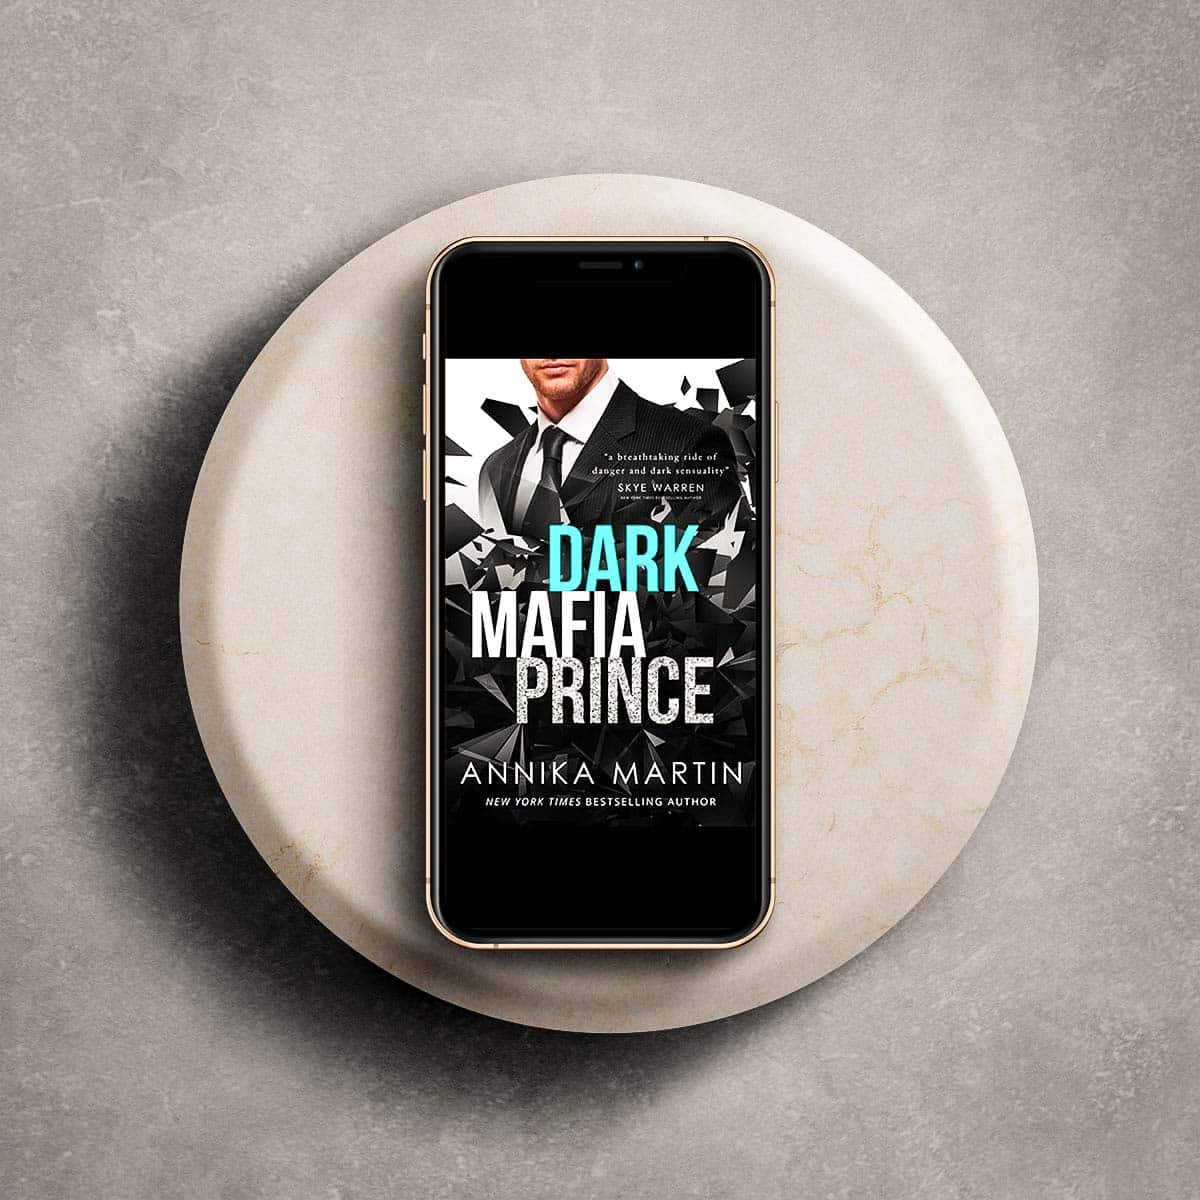 Buckle up because Dark Mafia Prince by Annika Martin is an adrenaline rush from the very first page with non-stop action and major twists at every turn.